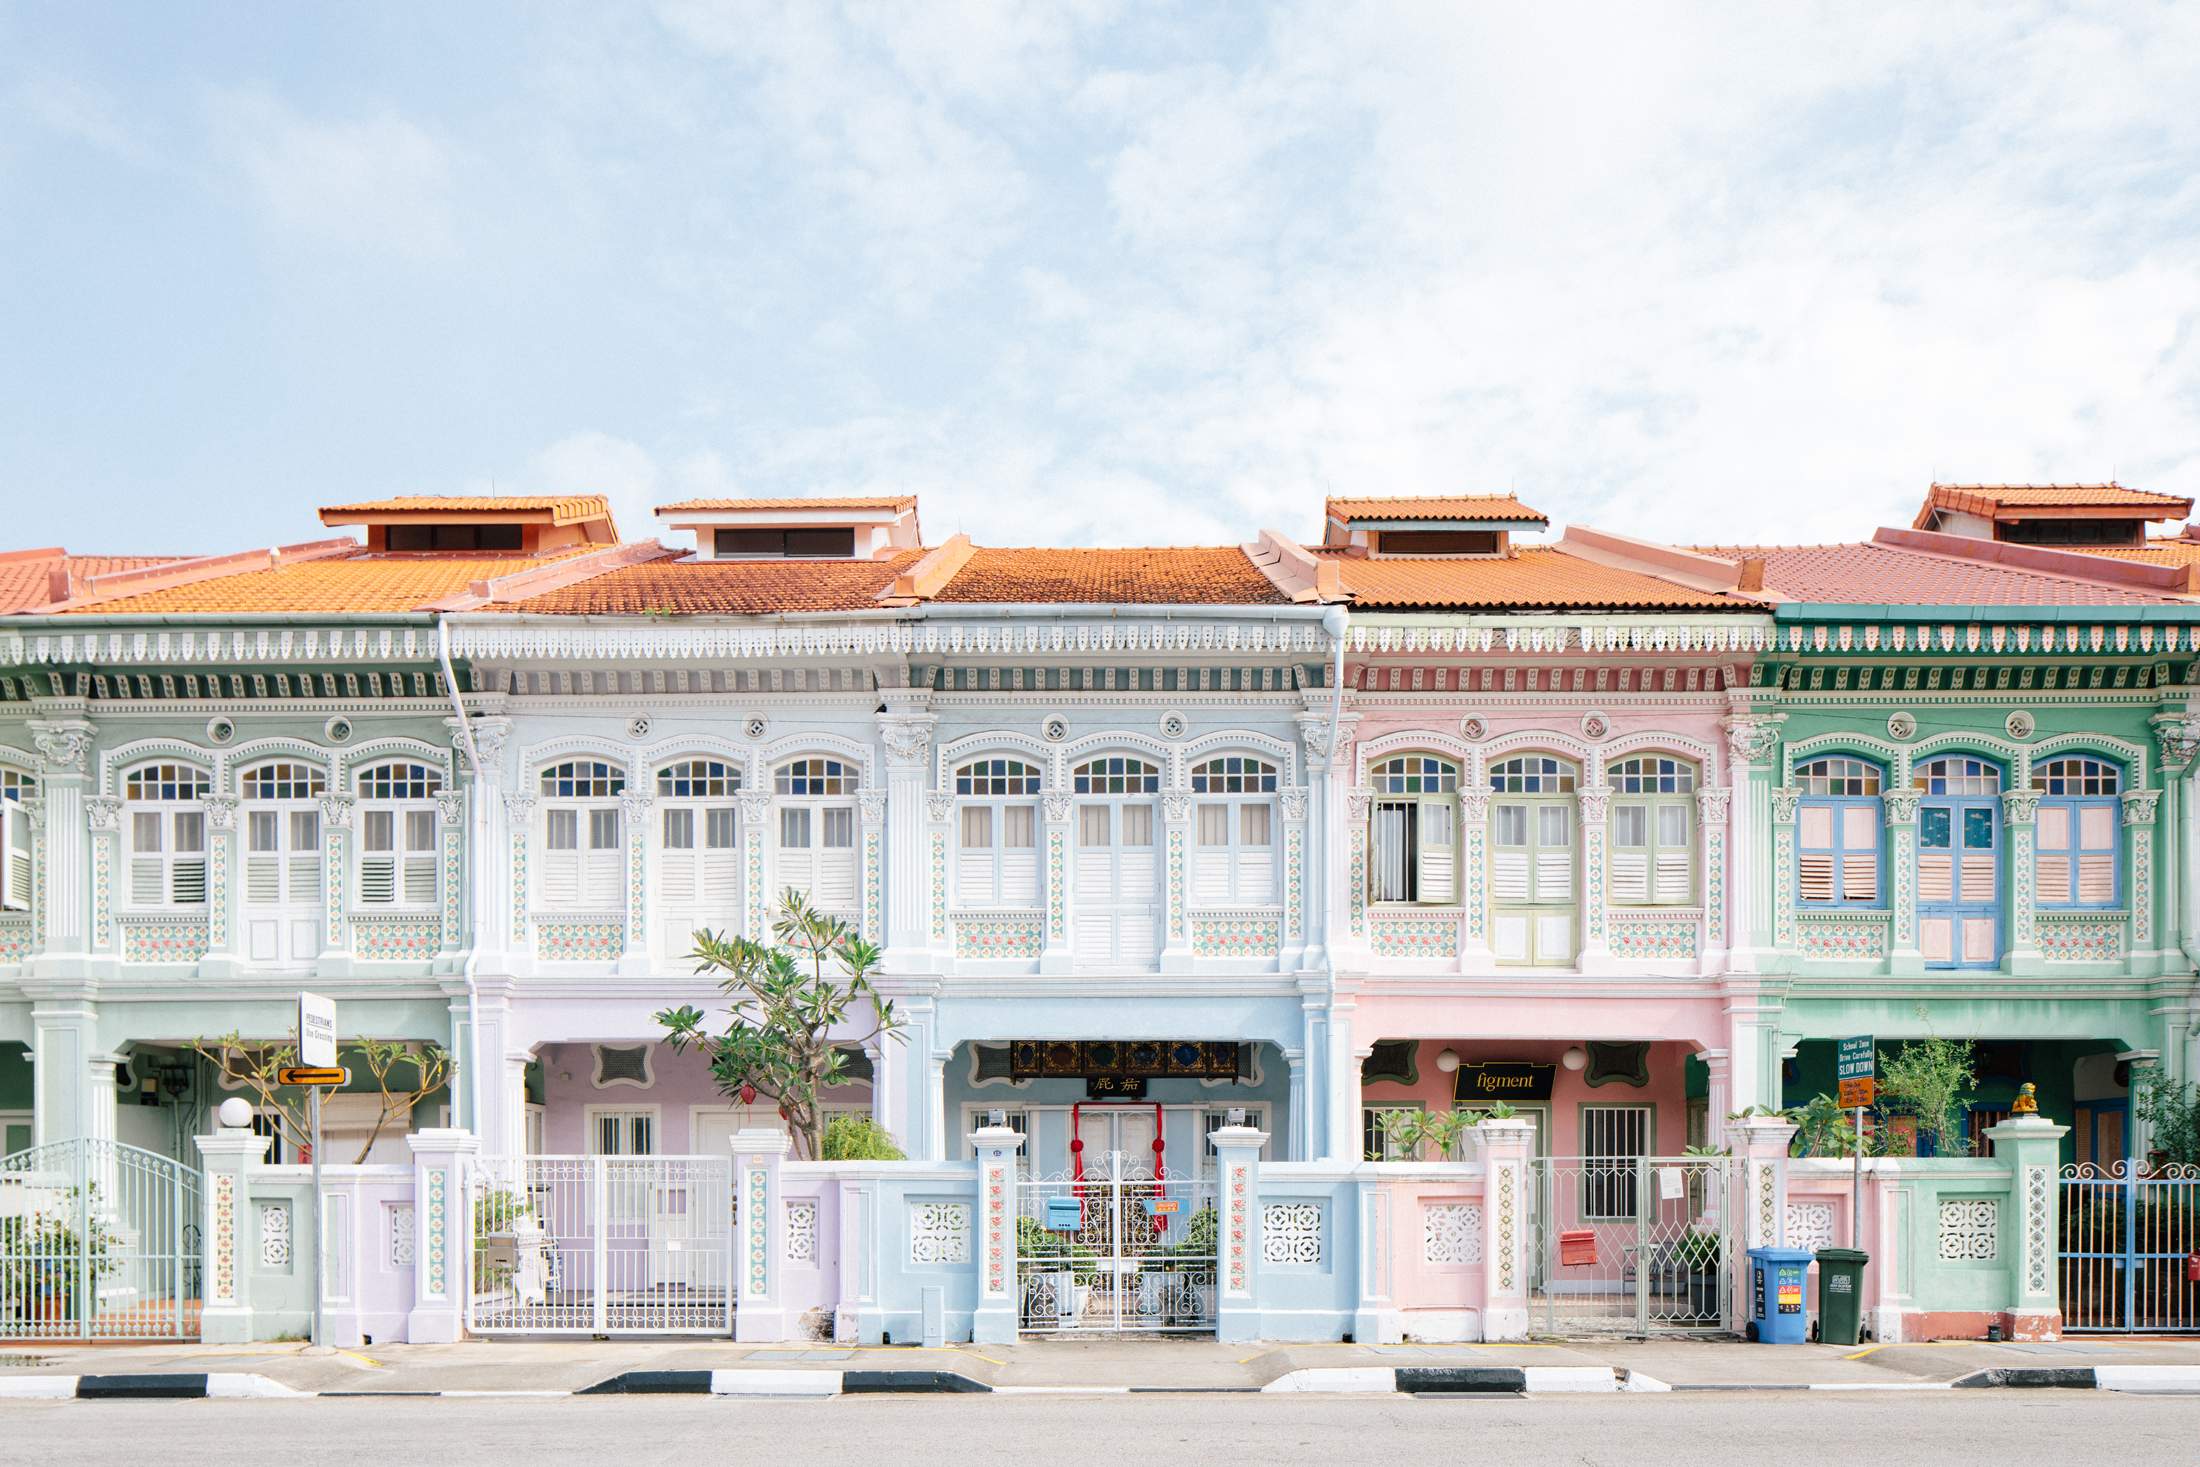 The Peranakan Shophouses of Joo Chiat, Picture credit: Monocle Magazine, issue 157